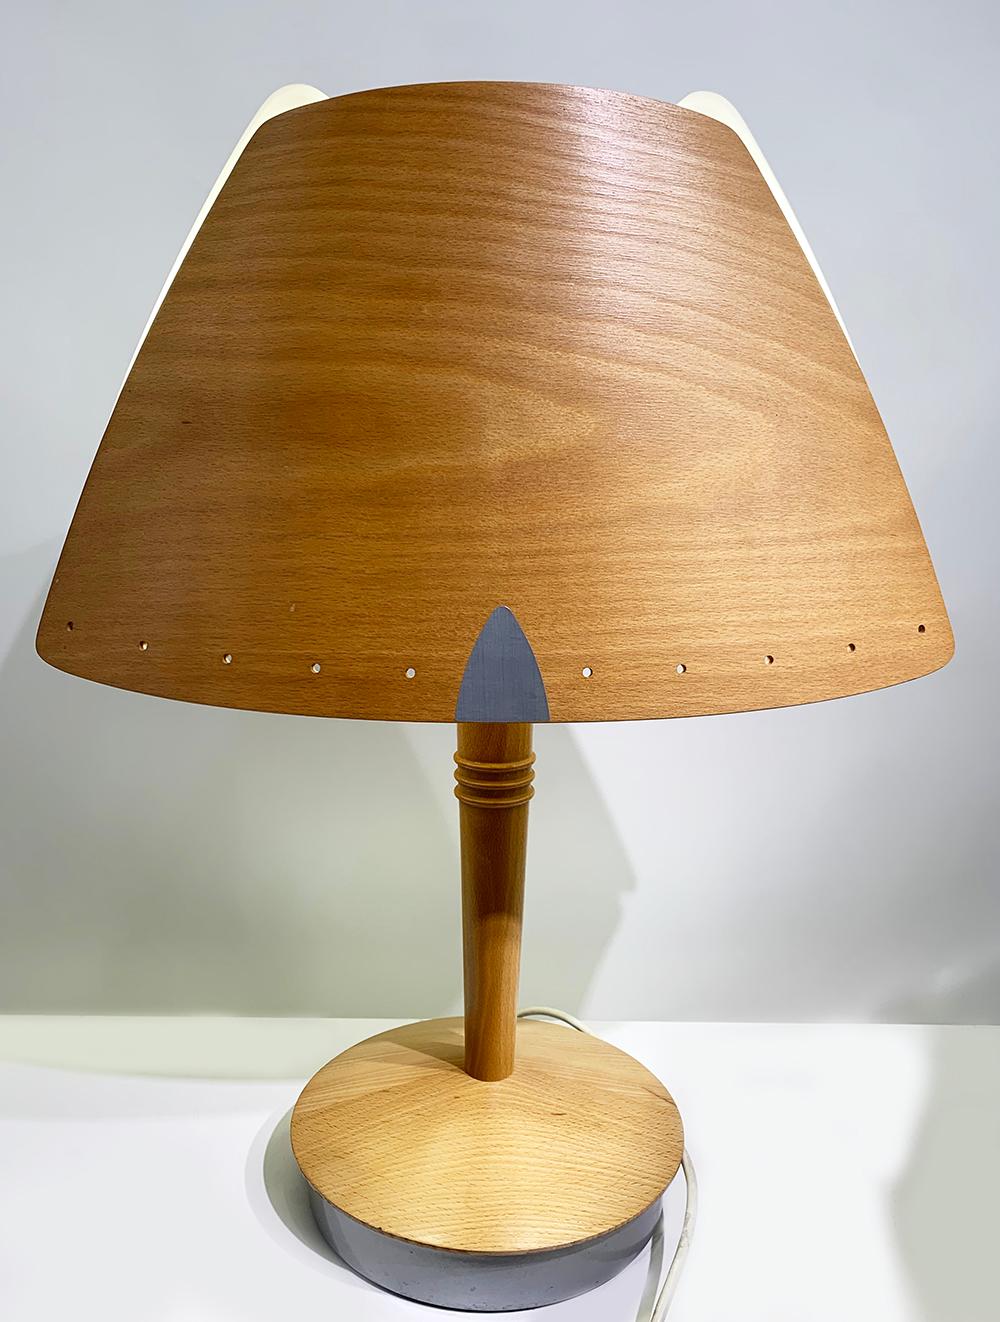 Culote model table lamp, manufactured by the french firm lucid and designed by soren eriksen.
It was designed specifically for the hilton hotel in barcelona in the 1970s. Metal base covered with wood and laminated wood and plexiglas screen.